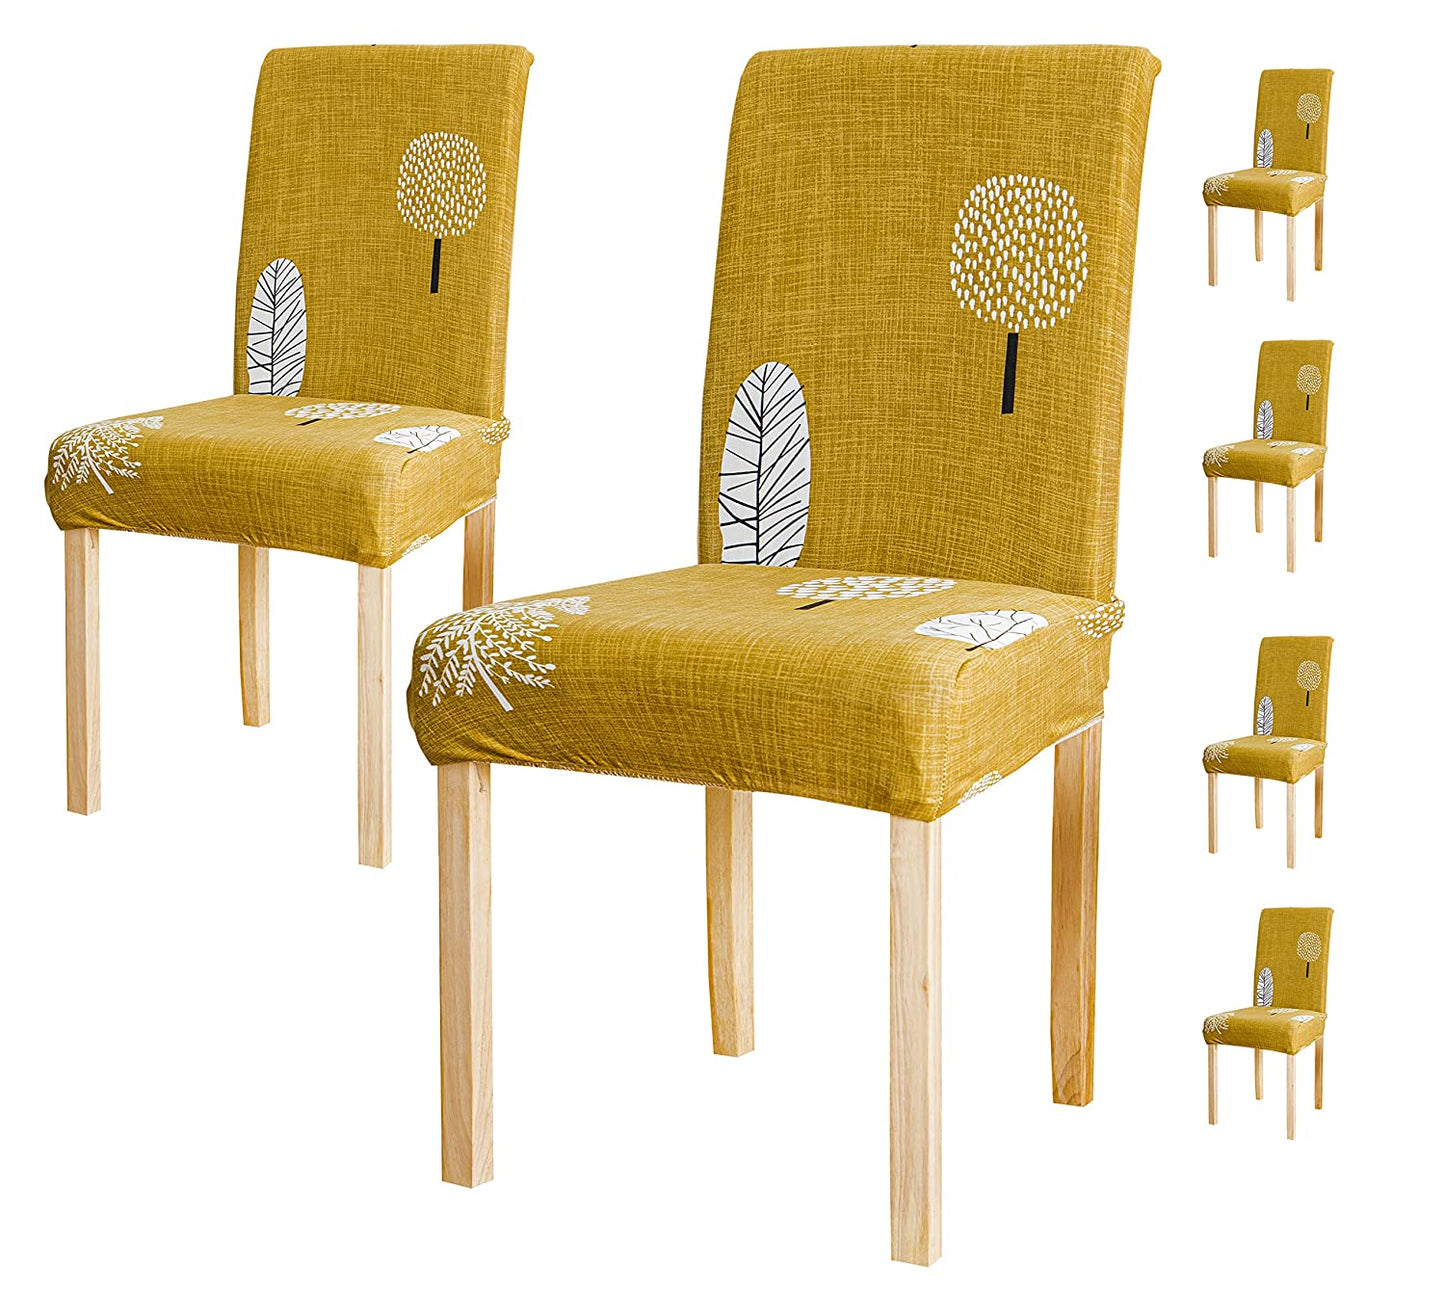 Printed Chair Cover - Mustard Flower